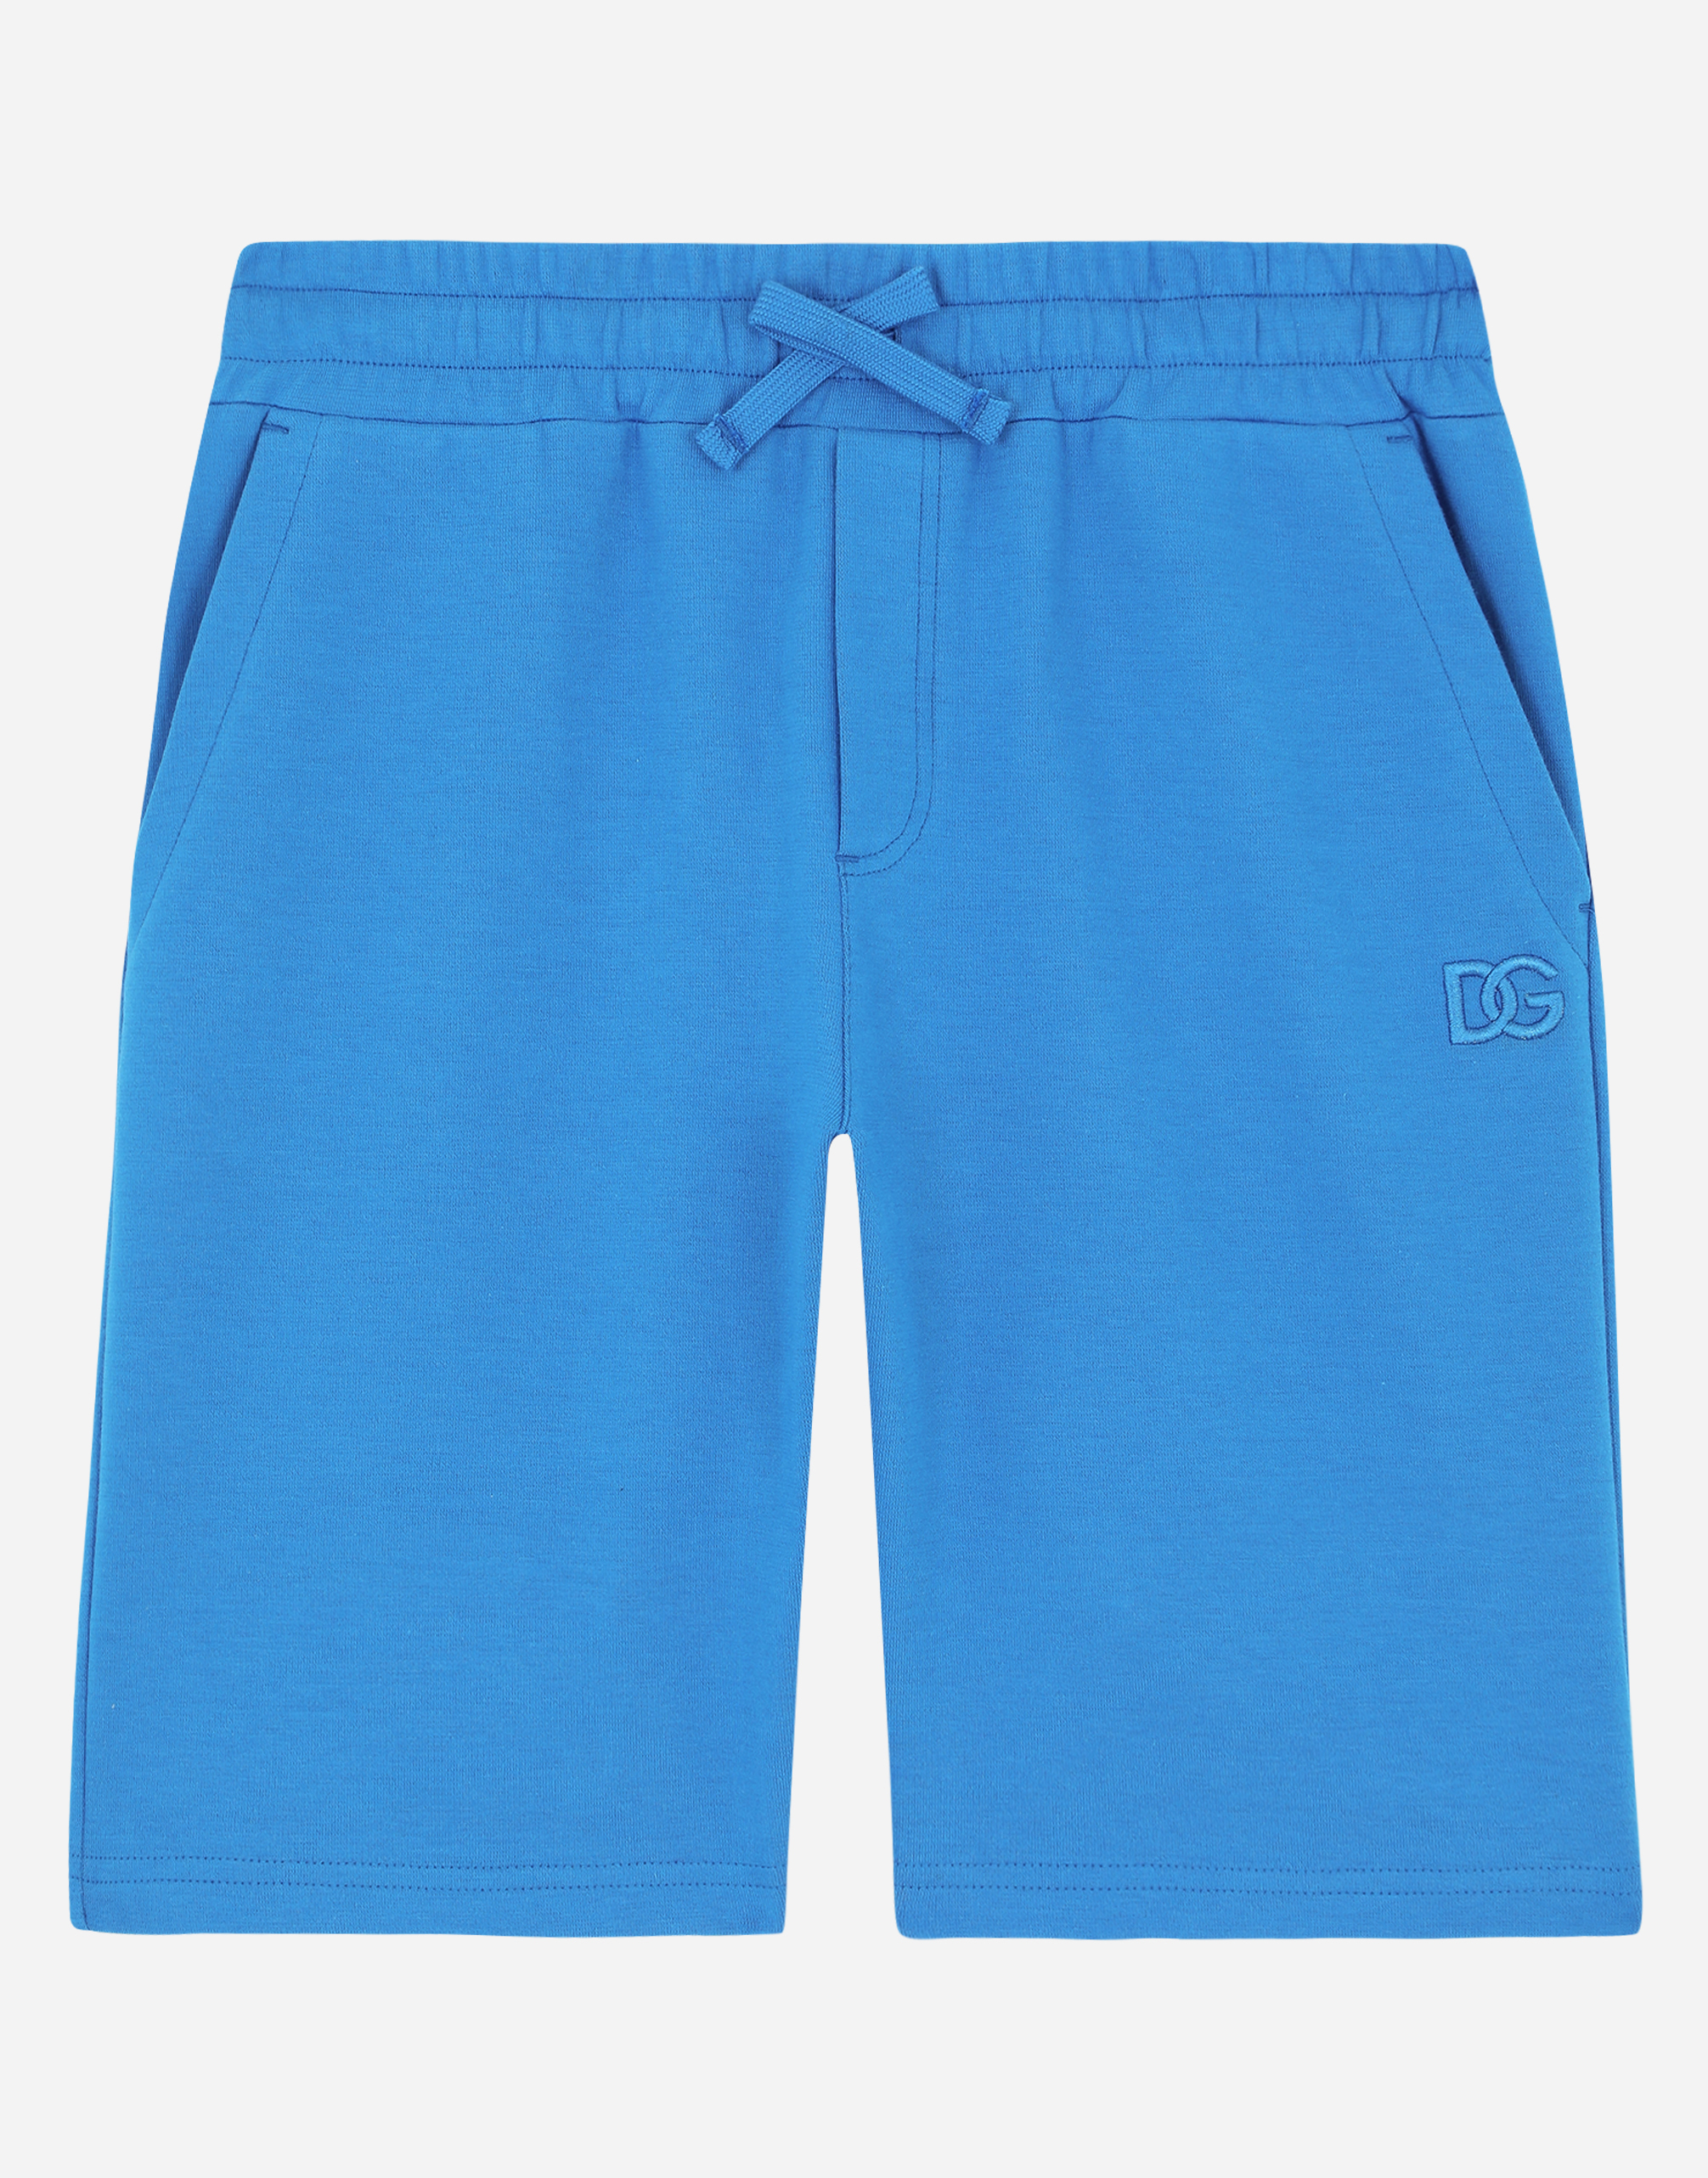 Jersey jogging shorts with DG logo embroidery in Turquoise